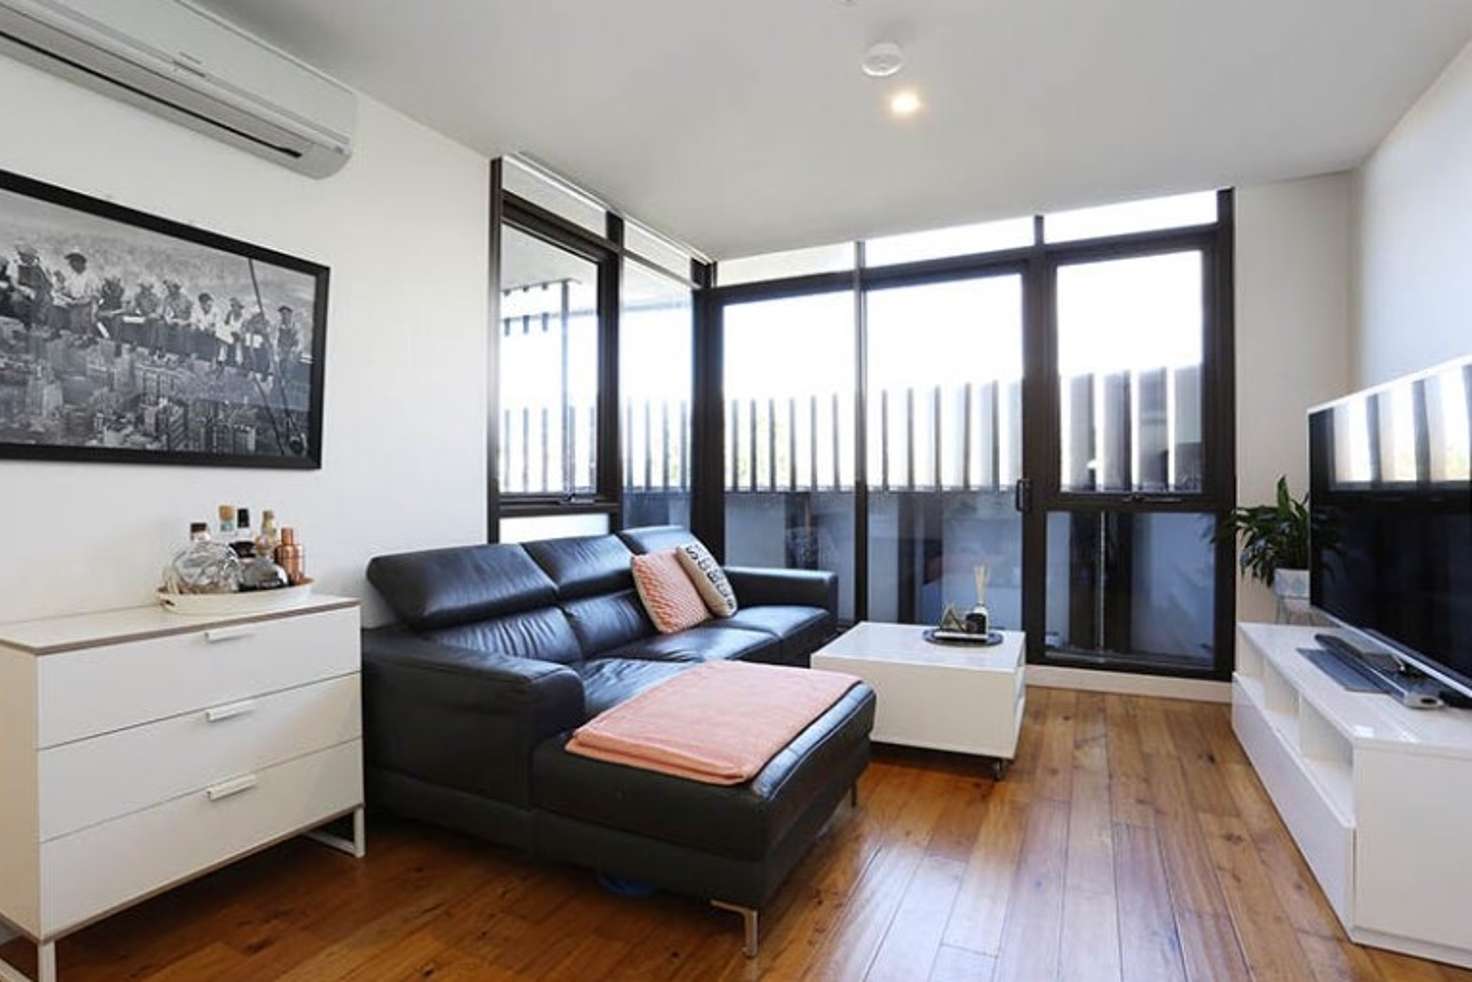 Main view of Homely apartment listing, 6204/172 Edward Street, Brunswick East VIC 3057